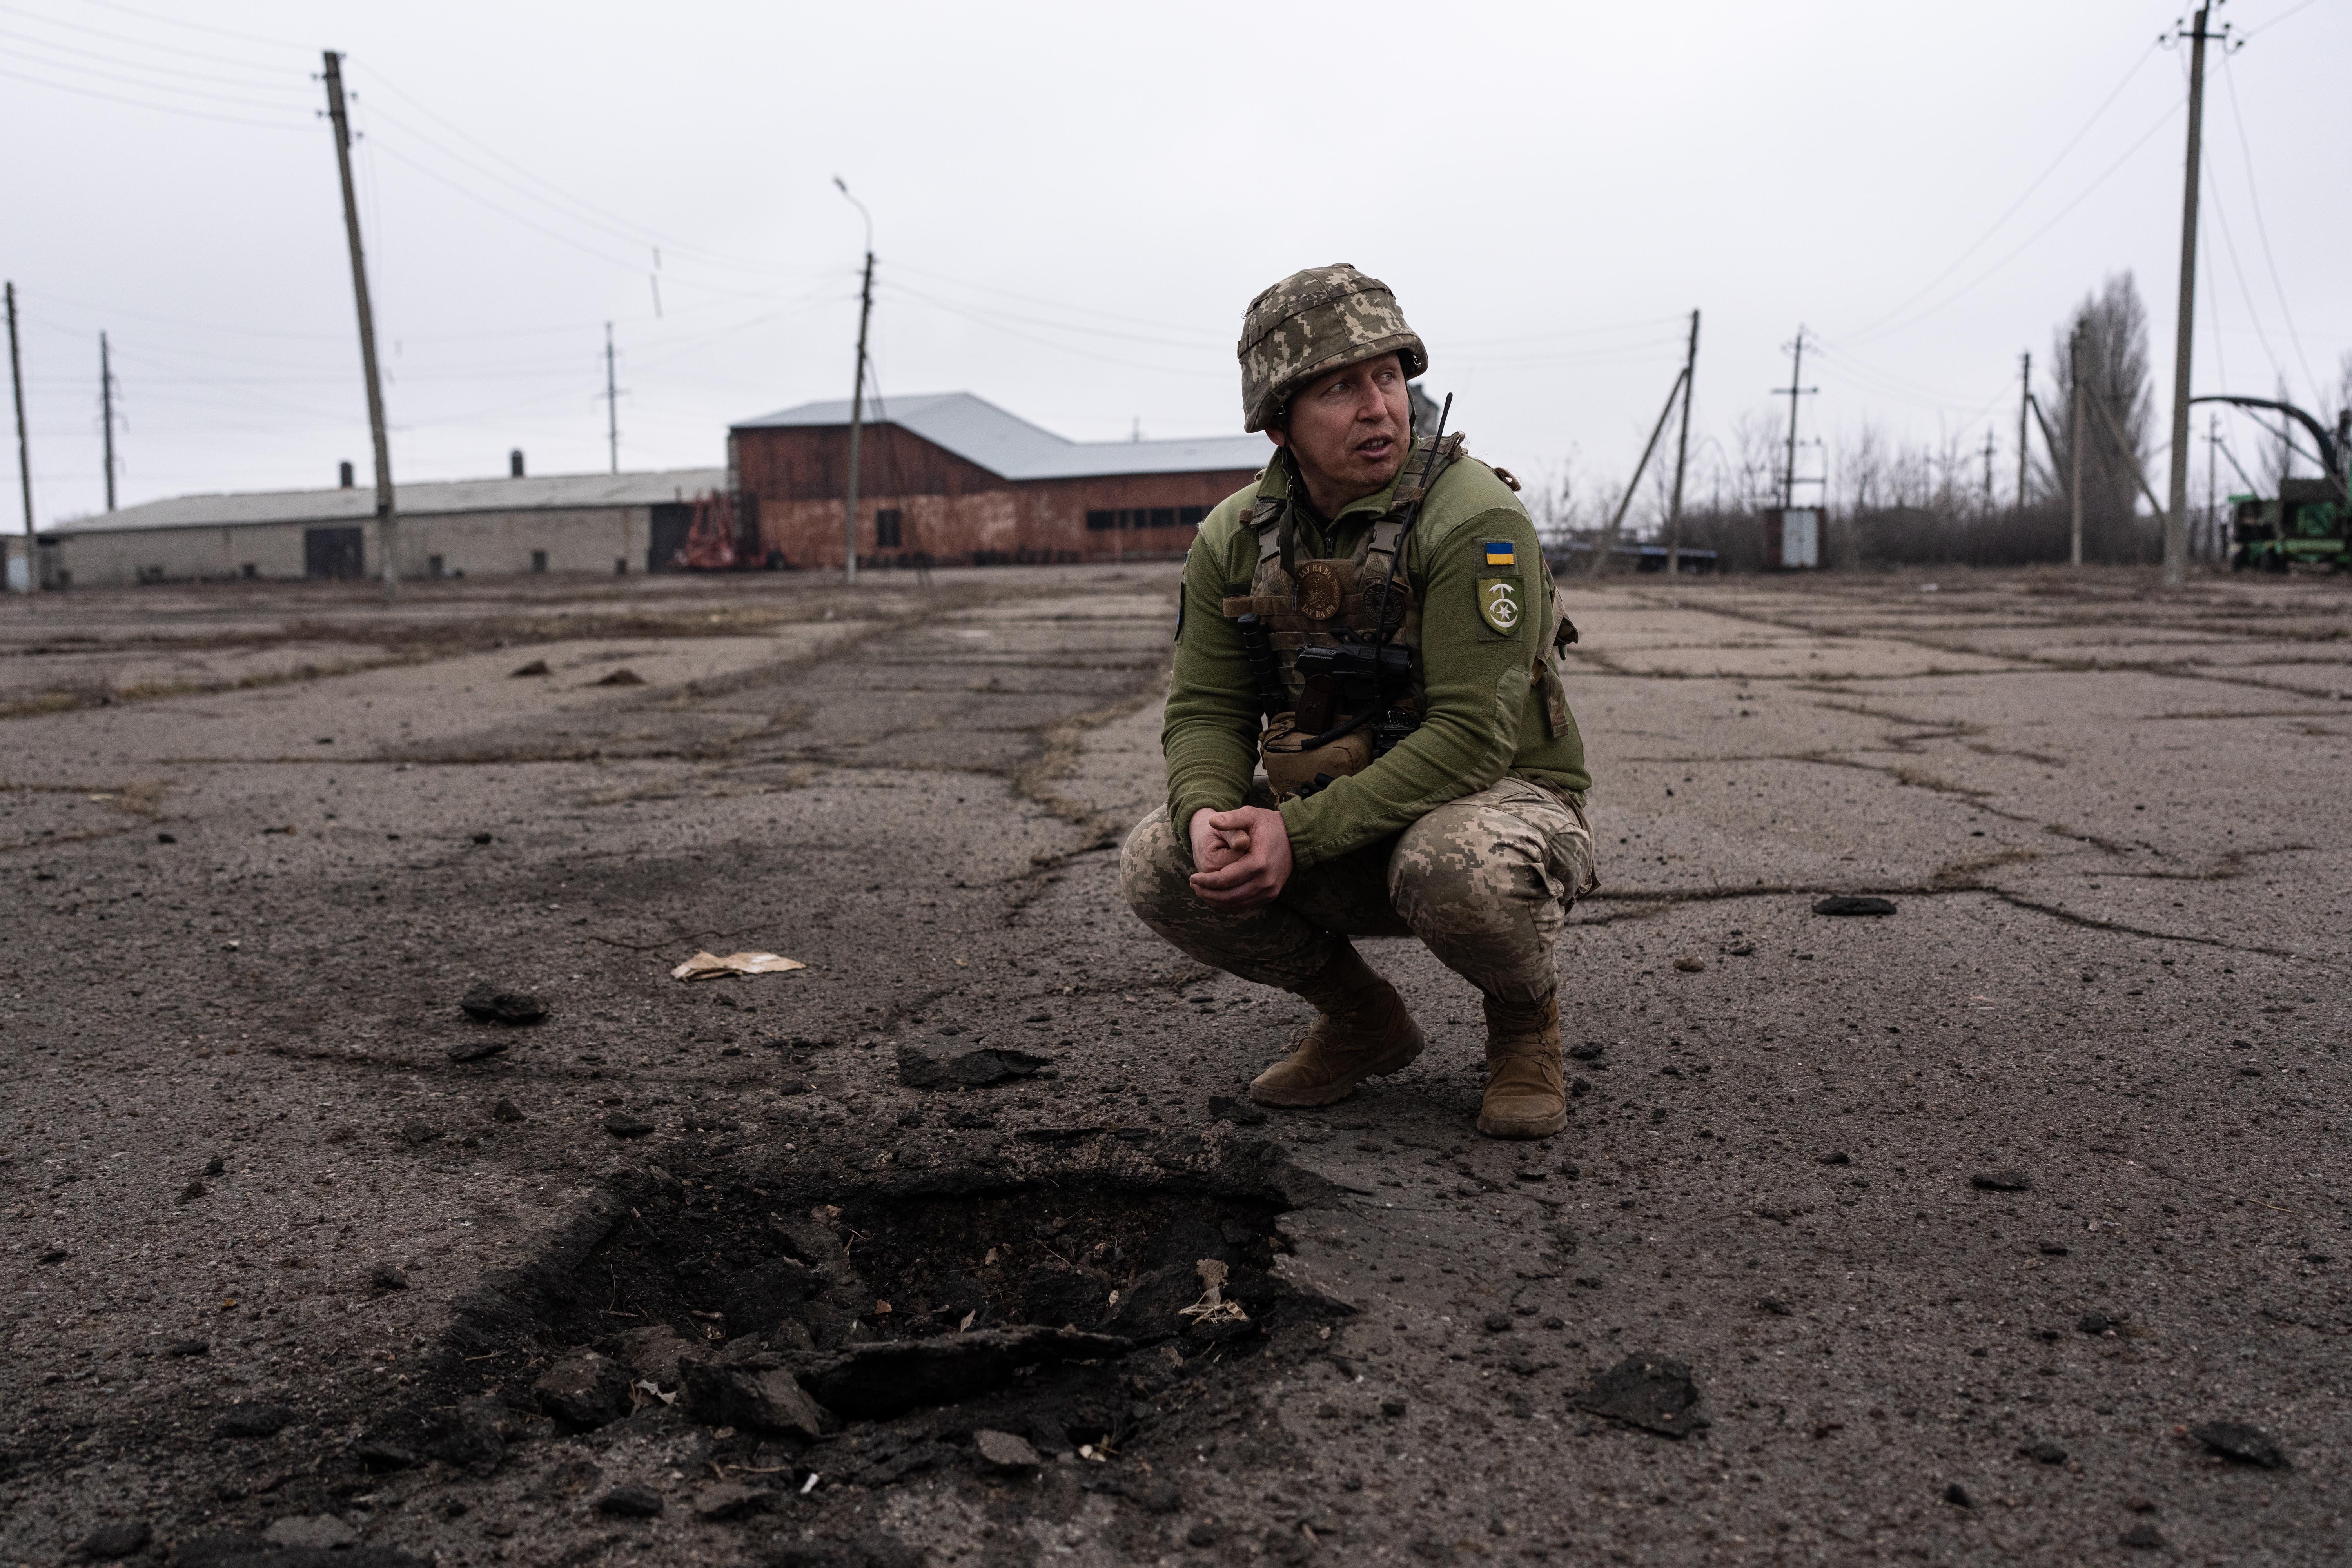 A Ukrainian commander shows the impact crater of an 82mm mortar in the town of Novaluhans'ke, Ukraine on February 22.